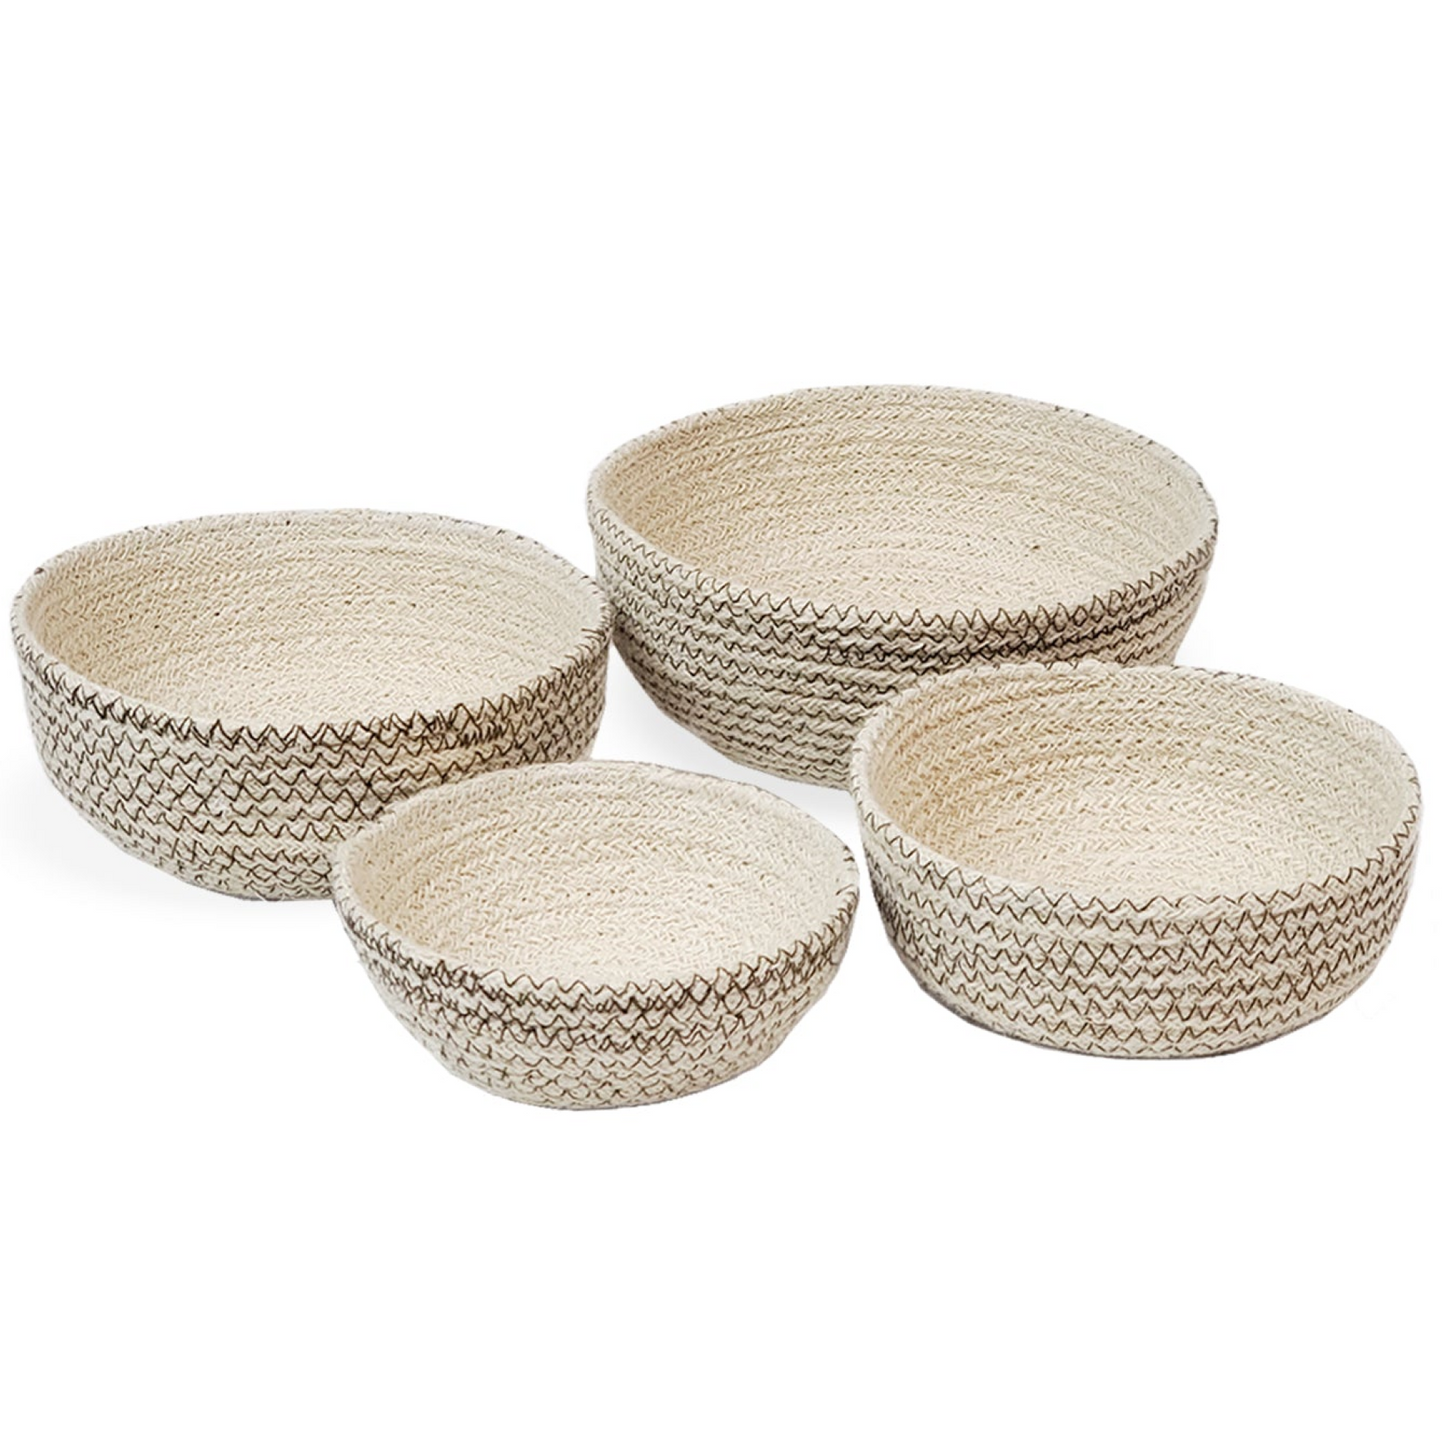 Hand Woven bowls - Brown Stitch. Set of 4